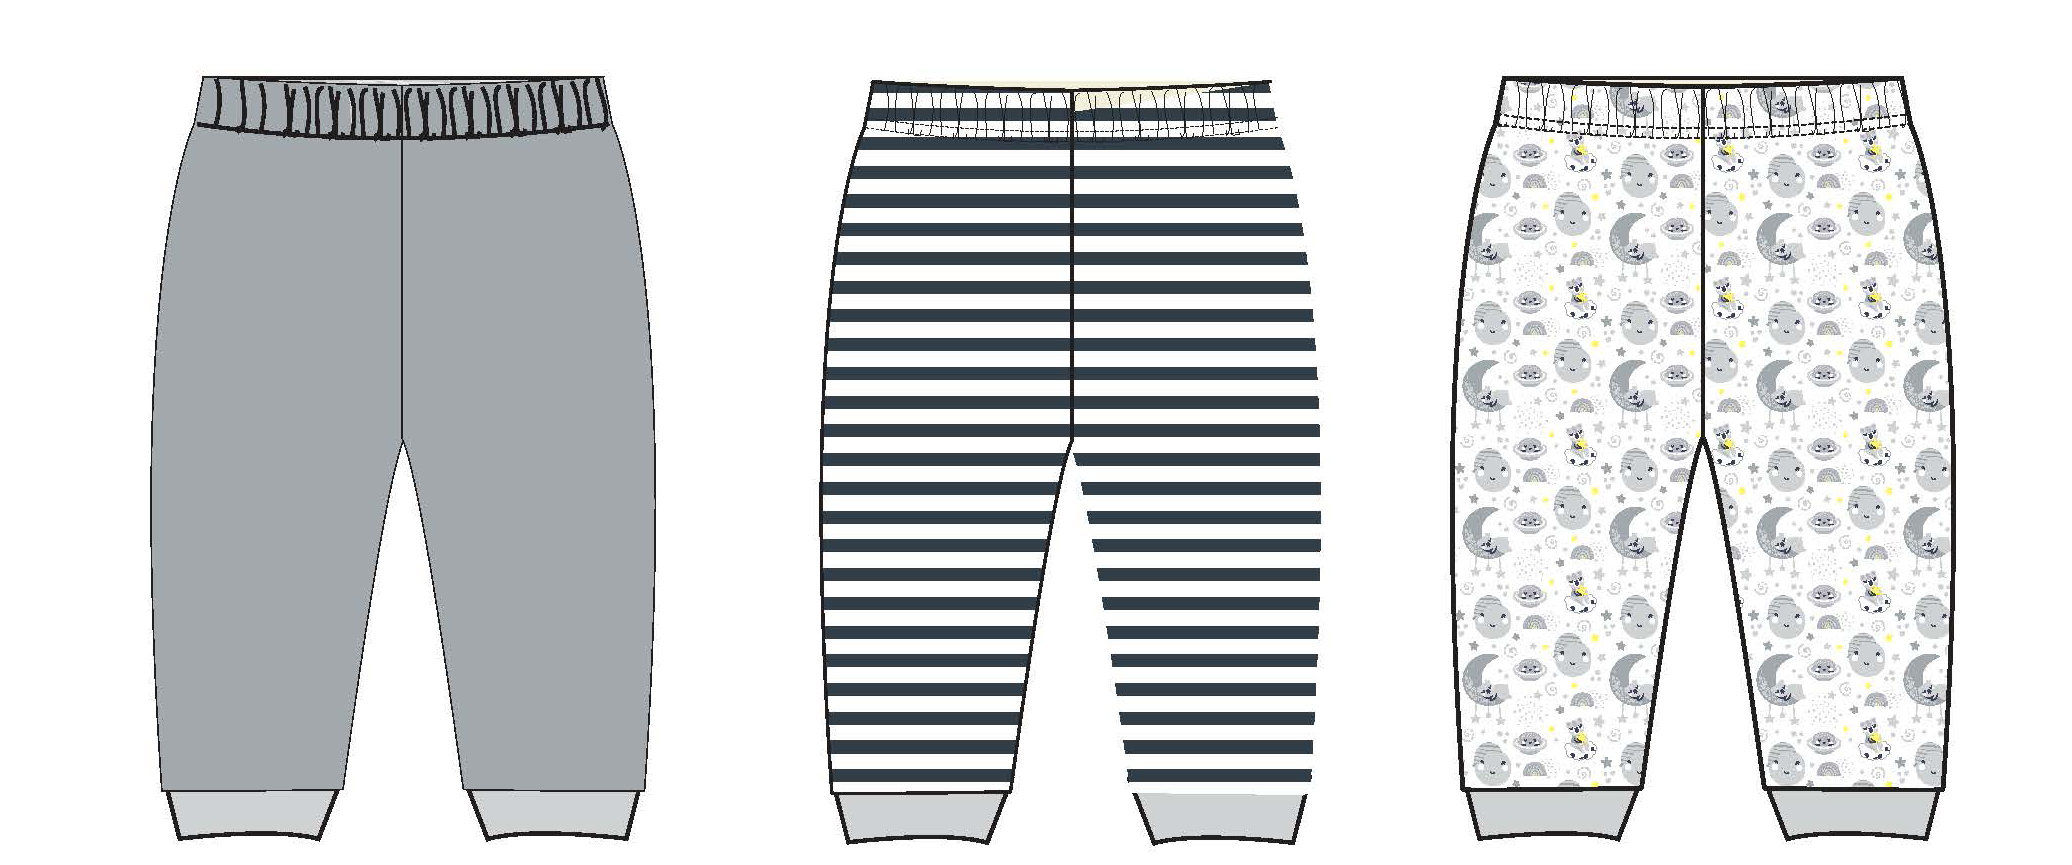 ''Gender Neutral Baby's Printed Pull-On PANTS w/ Striped, Solid, & Night Sky Print - Sizes 0/3M-9M''